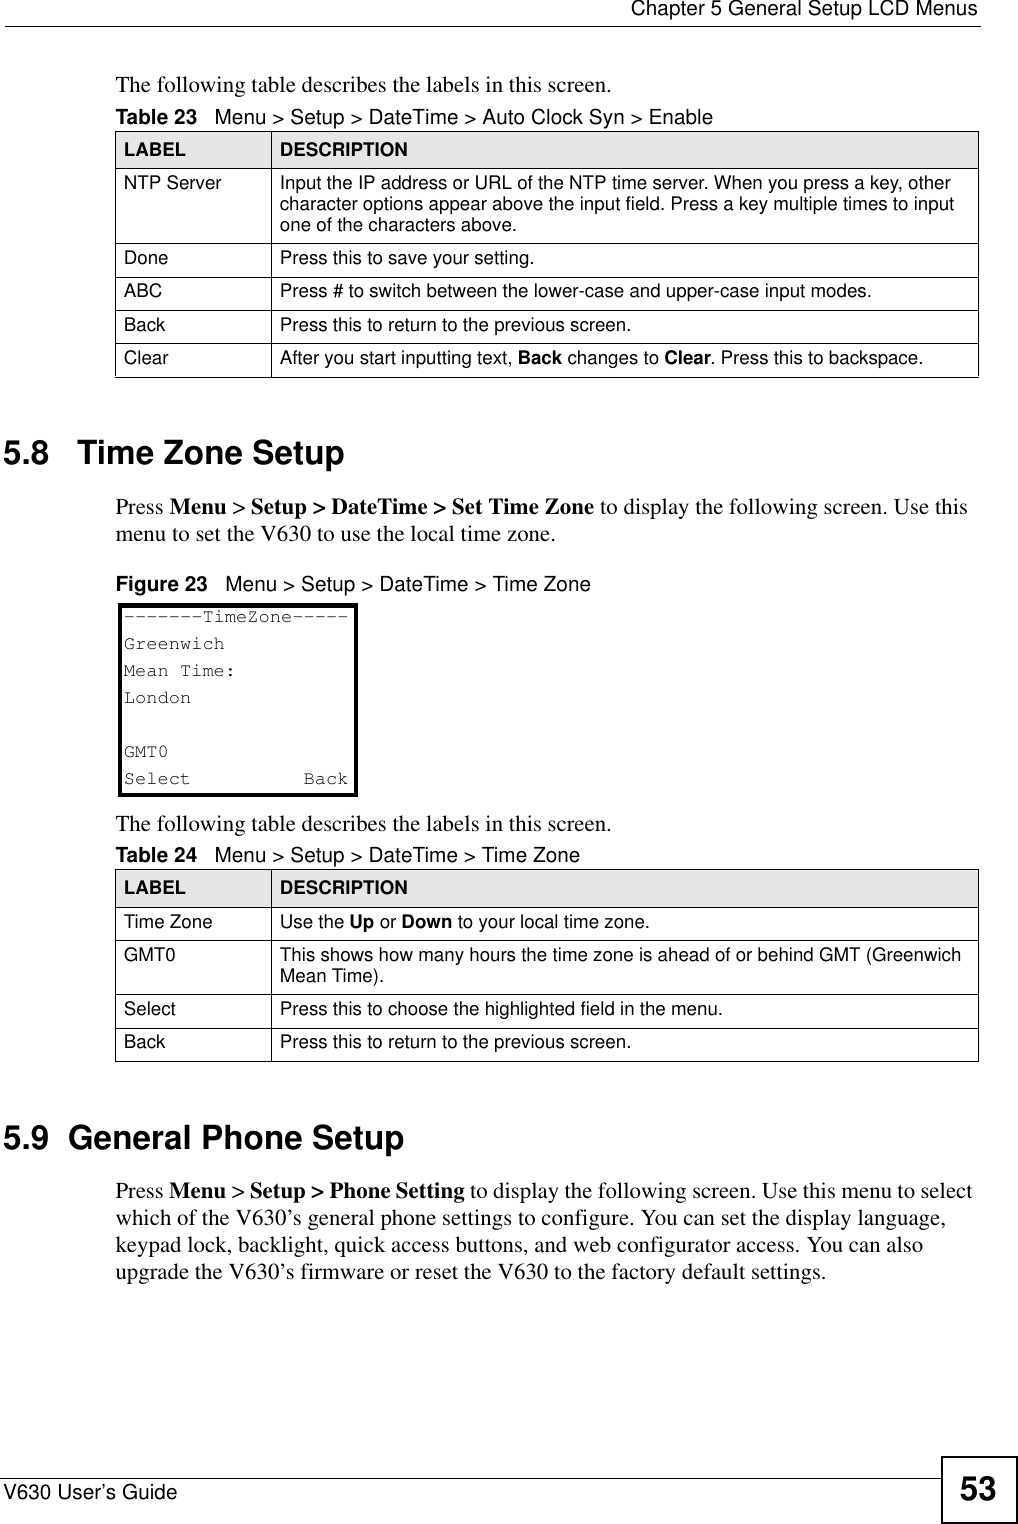  Chapter 5 General Setup LCD MenusV630 User’s Guide 53The following table describes the labels in this screen.5.8   Time Zone SetupPress Menu &gt; Setup &gt; DateTime &gt; Set Time Zone to display the following screen. Use this menu to set the V630 to use the local time zone.Figure 23   Menu &gt; Setup &gt; DateTime &gt; Time Zone The following table describes the labels in this screen.5.9  General Phone SetupPress Menu &gt; Setup &gt; Phone Setting to display the following screen. Use this menu to select which of the V630’s general phone settings to configure. You can set the display language, keypad lock, backlight, quick access buttons, and web configurator access. You can also upgrade the V630’s firmware or reset the V630 to the factory default settings. Table 23   Menu &gt; Setup &gt; DateTime &gt; Auto Clock Syn &gt; EnableLABEL DESCRIPTIONNTP Server Input the IP address or URL of the NTP time server. When you press a key, other character options appear above the input field. Press a key multiple times to input one of the characters above.Done Press this to save your setting. ABC Press # to switch between the lower-case and upper-case input modes. Back Press this to return to the previous screen. Clear After you start inputting text, Back changes to Clear. Press this to backspace.Table 24   Menu &gt; Setup &gt; DateTime &gt; Time ZoneLABEL DESCRIPTIONTime Zone Use the Up or Down to your local time zone.GMT0 This shows how many hours the time zone is ahead of or behind GMT (Greenwich Mean Time).Select Press this to choose the highlighted field in the menu.Back Press this to return to the previous screen.-------TimeZone-----GreenwichMean Time:LondonGMT0Select   Back